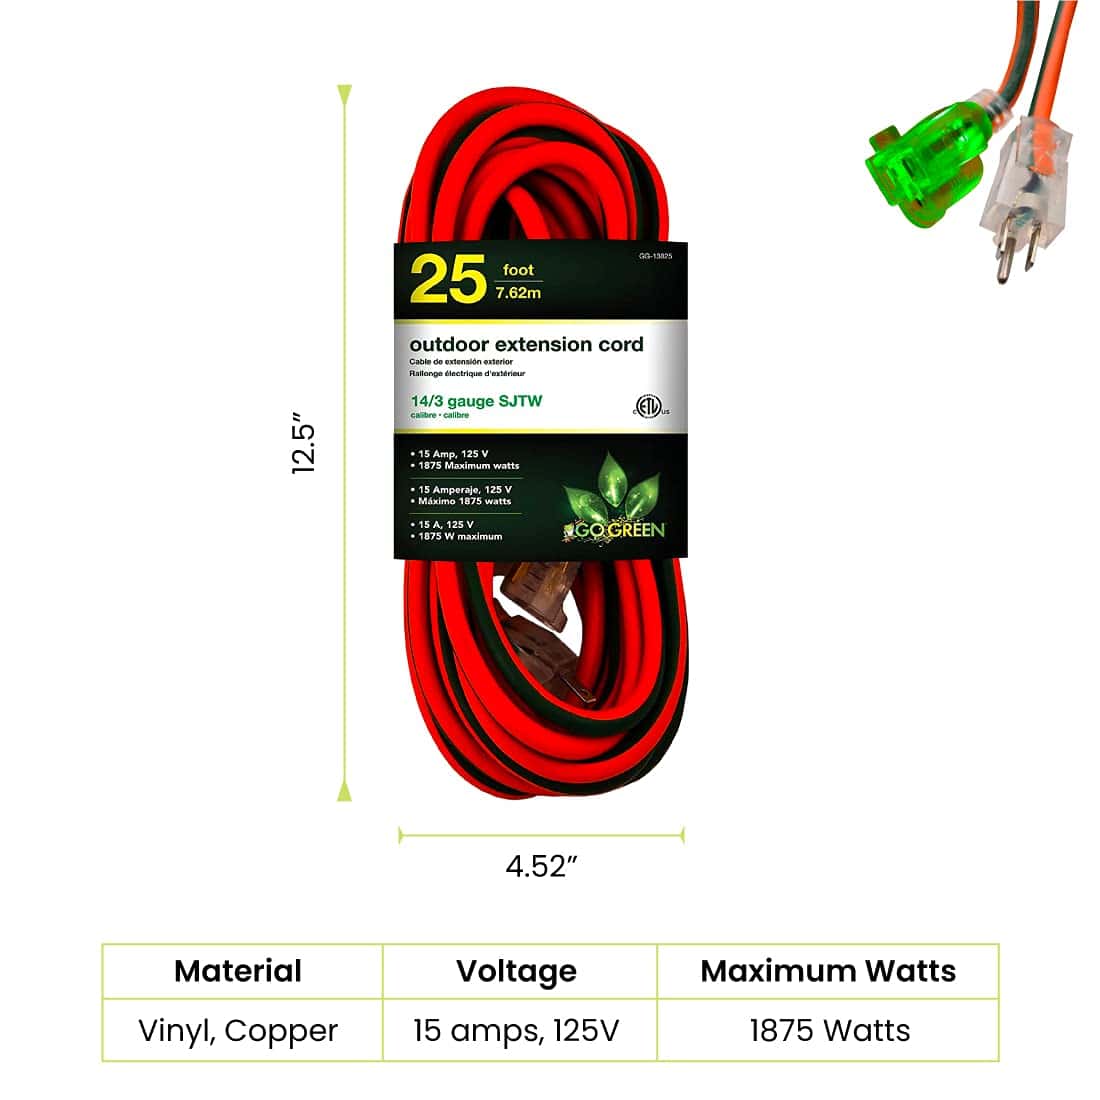 Go Green Power Inc. (GG-13825) 14 3 SJTW Outdoor Extension Cord Lighted Extension Cord 25 ft 2